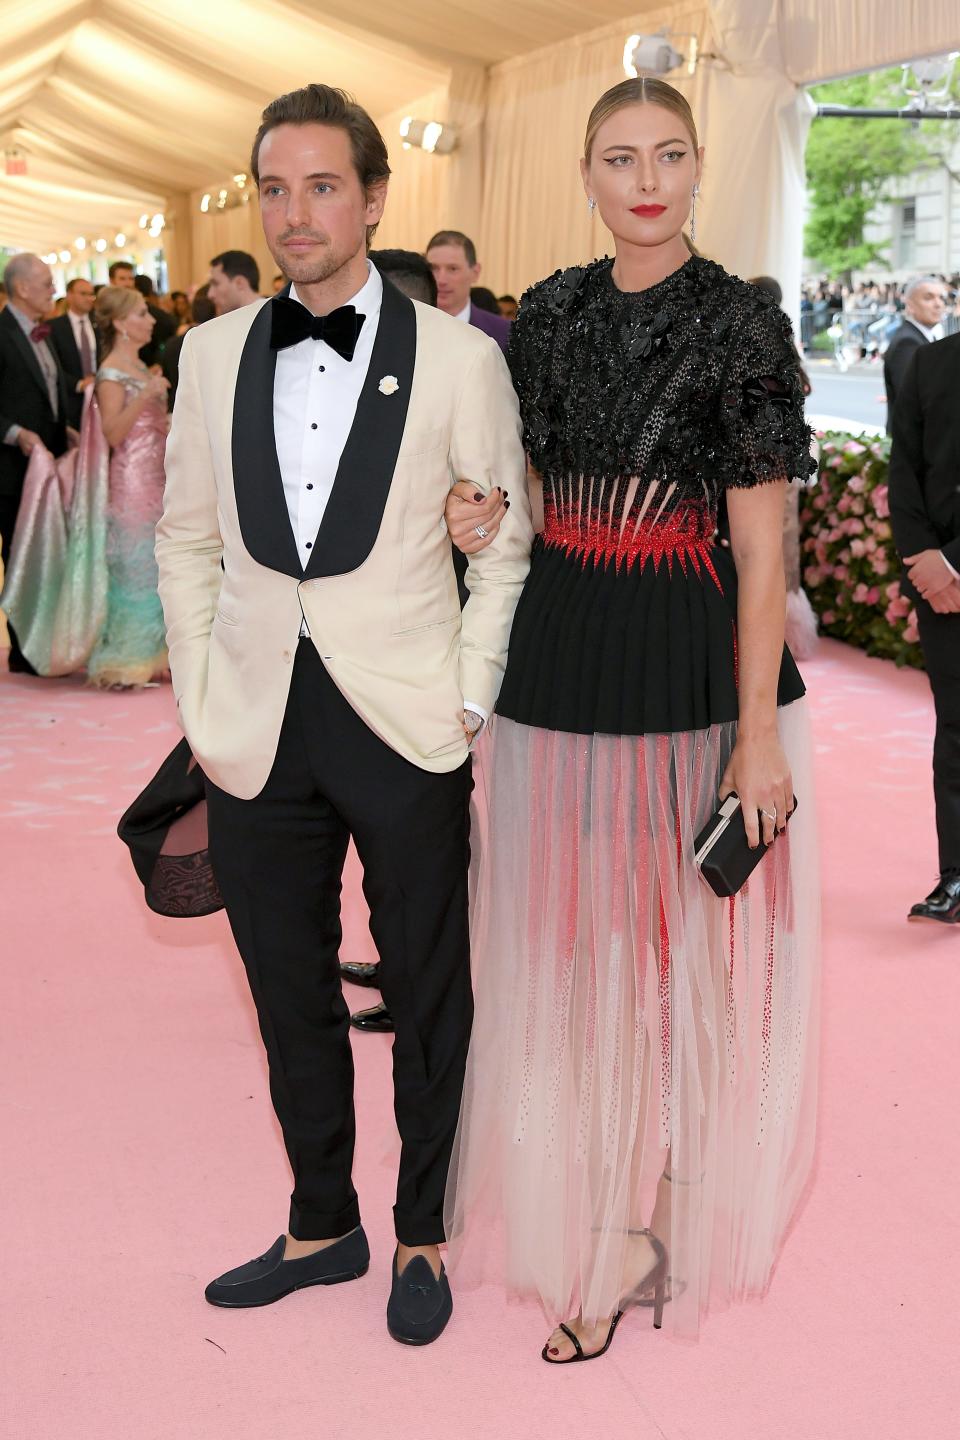 Maria Sharapova, right, and Alexander Gilkes attend The 2019 Met Gala at the Metropolitan Museum of Art in New York City.